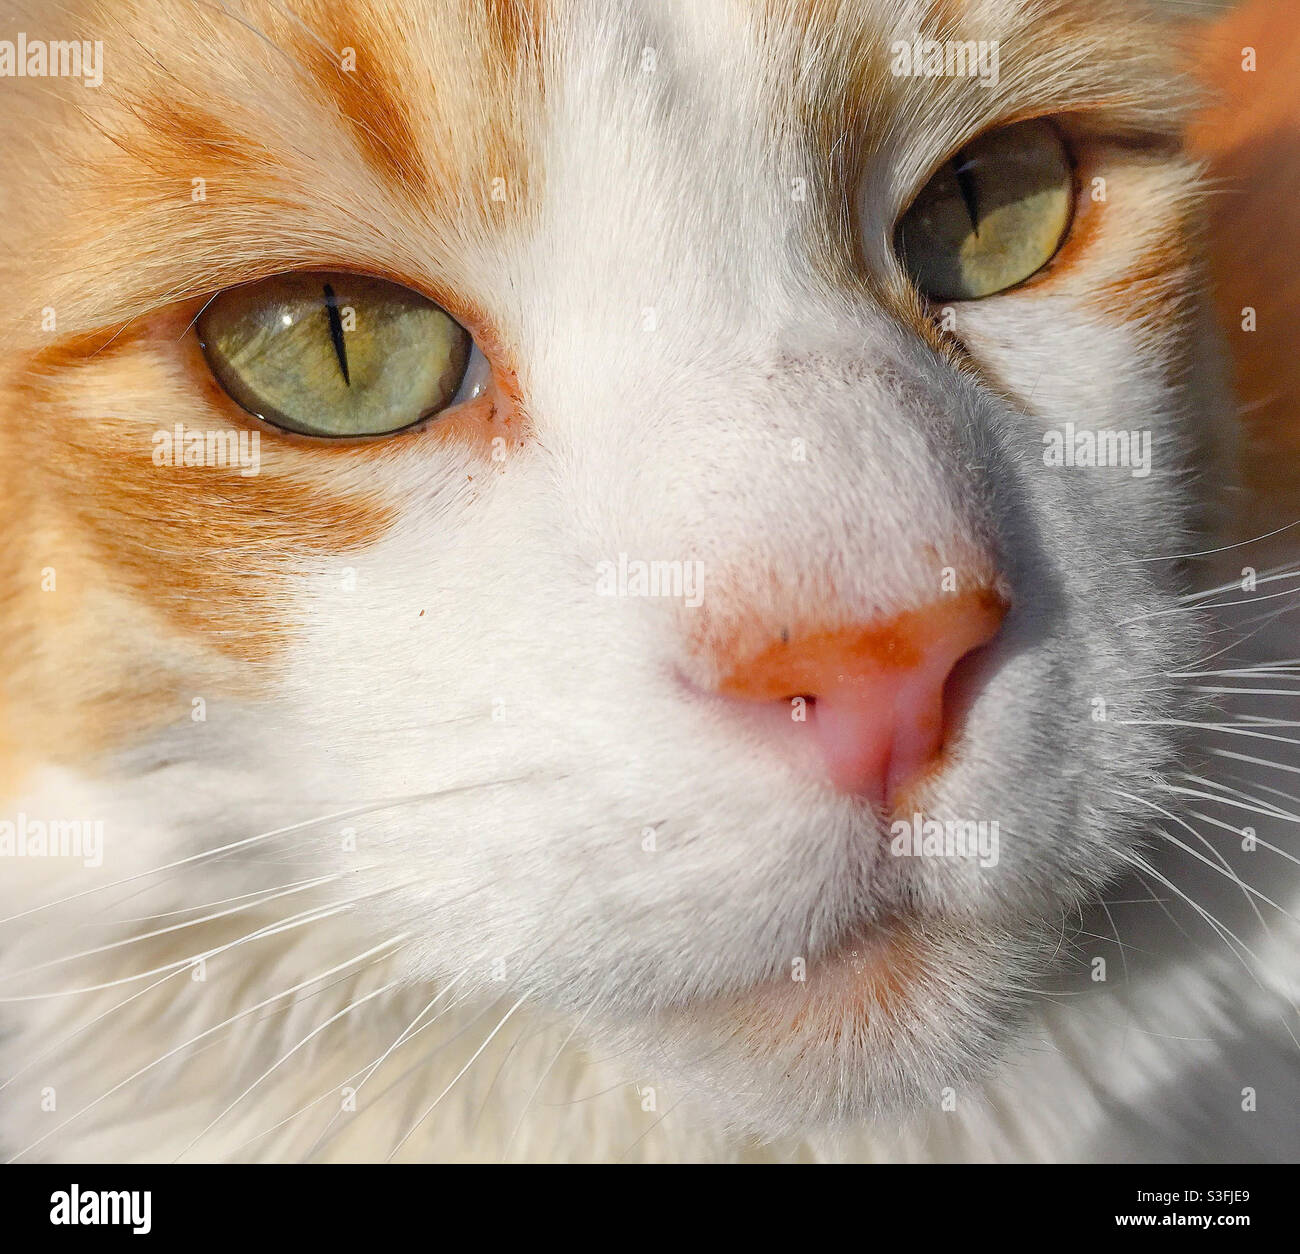 Close up of an orange and white cat’s face. Stock Photo